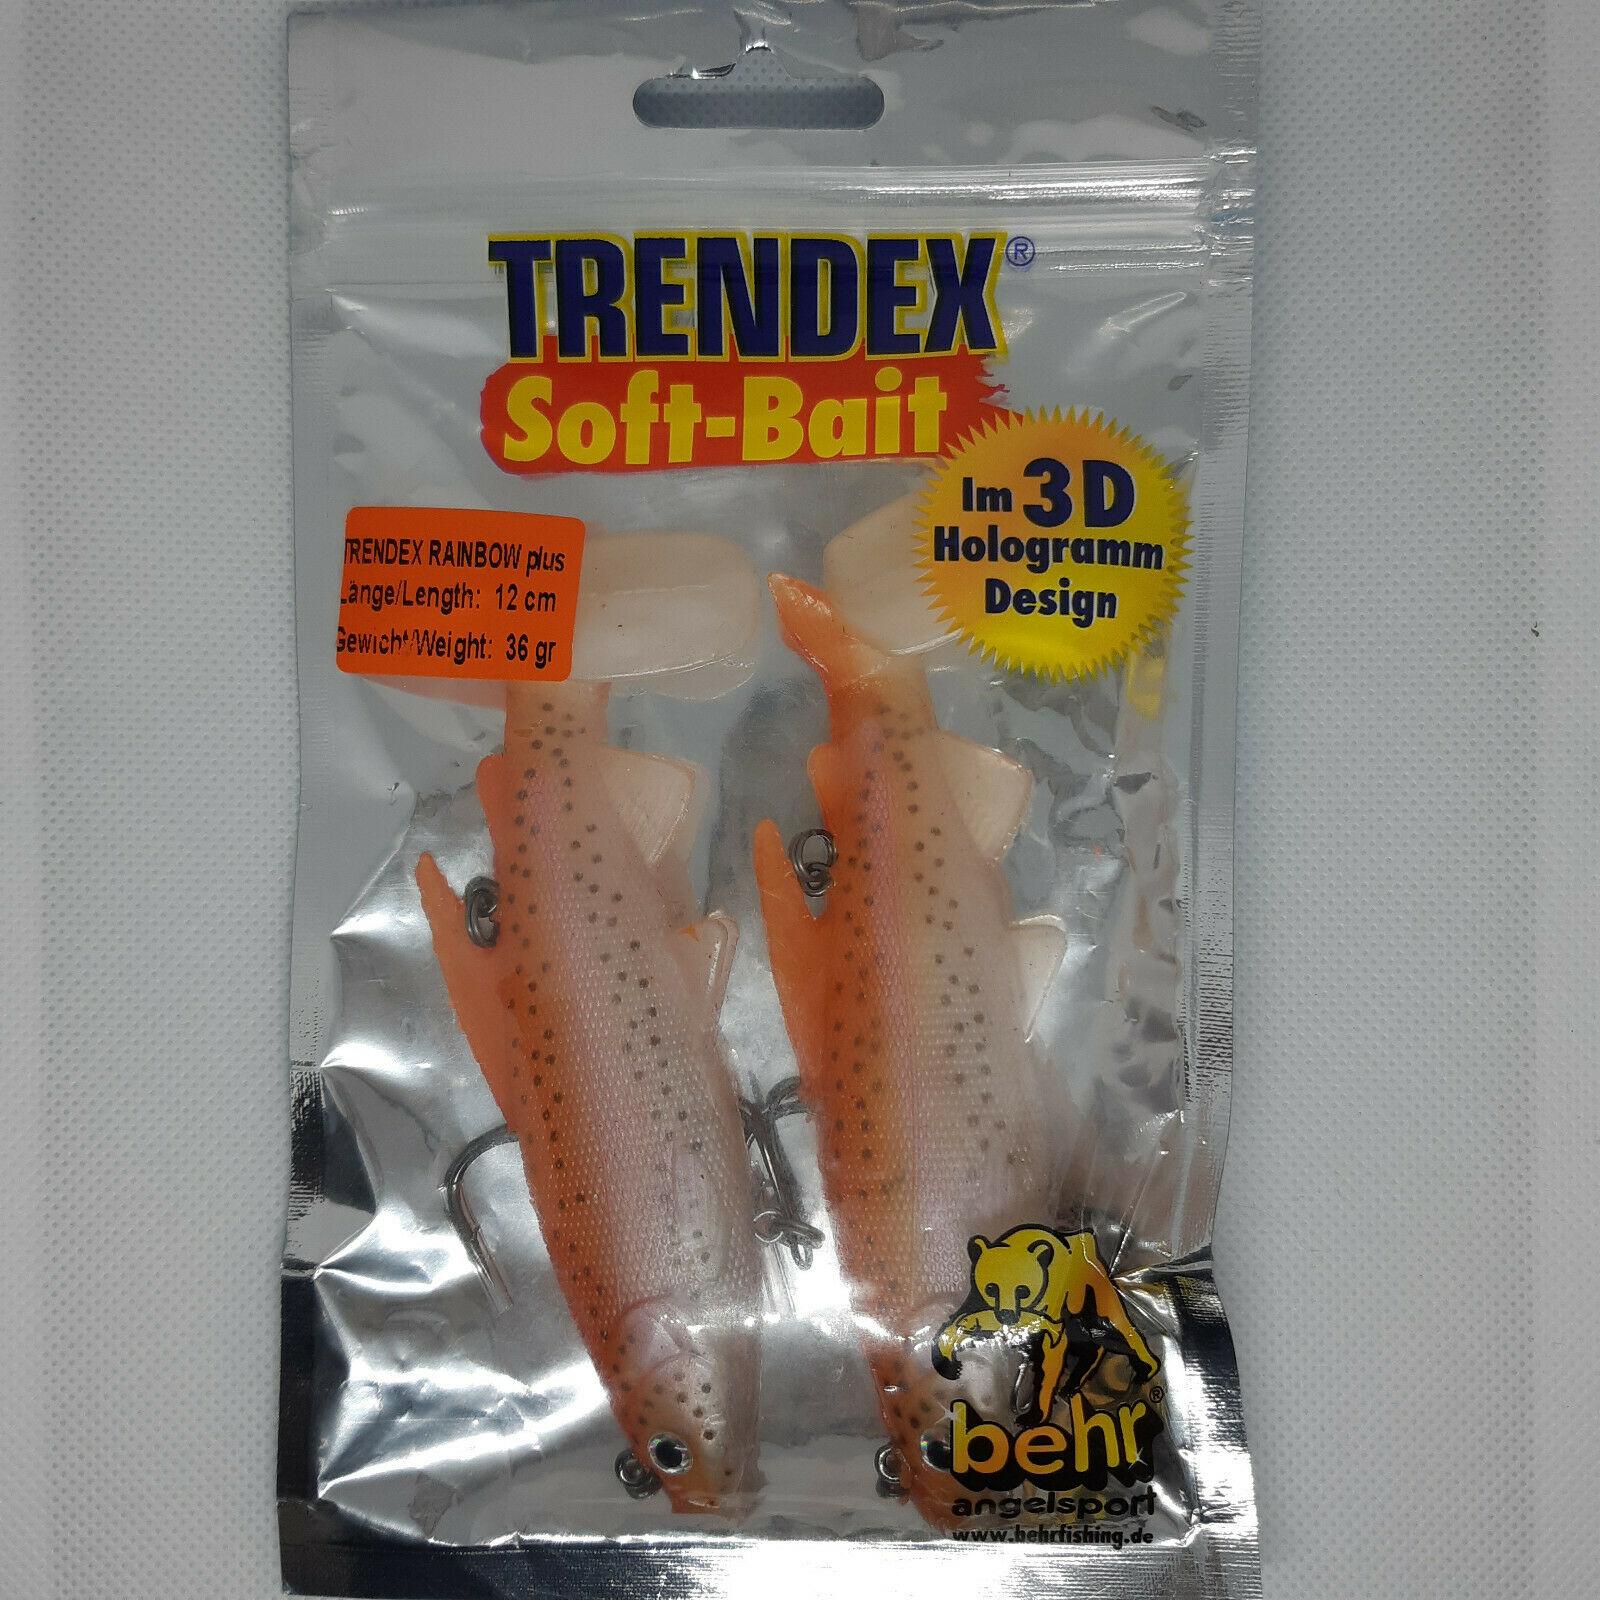 Behr Trendex Soft Bait Lures Pike Perch Trout Pack Of 2 Golden Trout Lures 12cm 36g